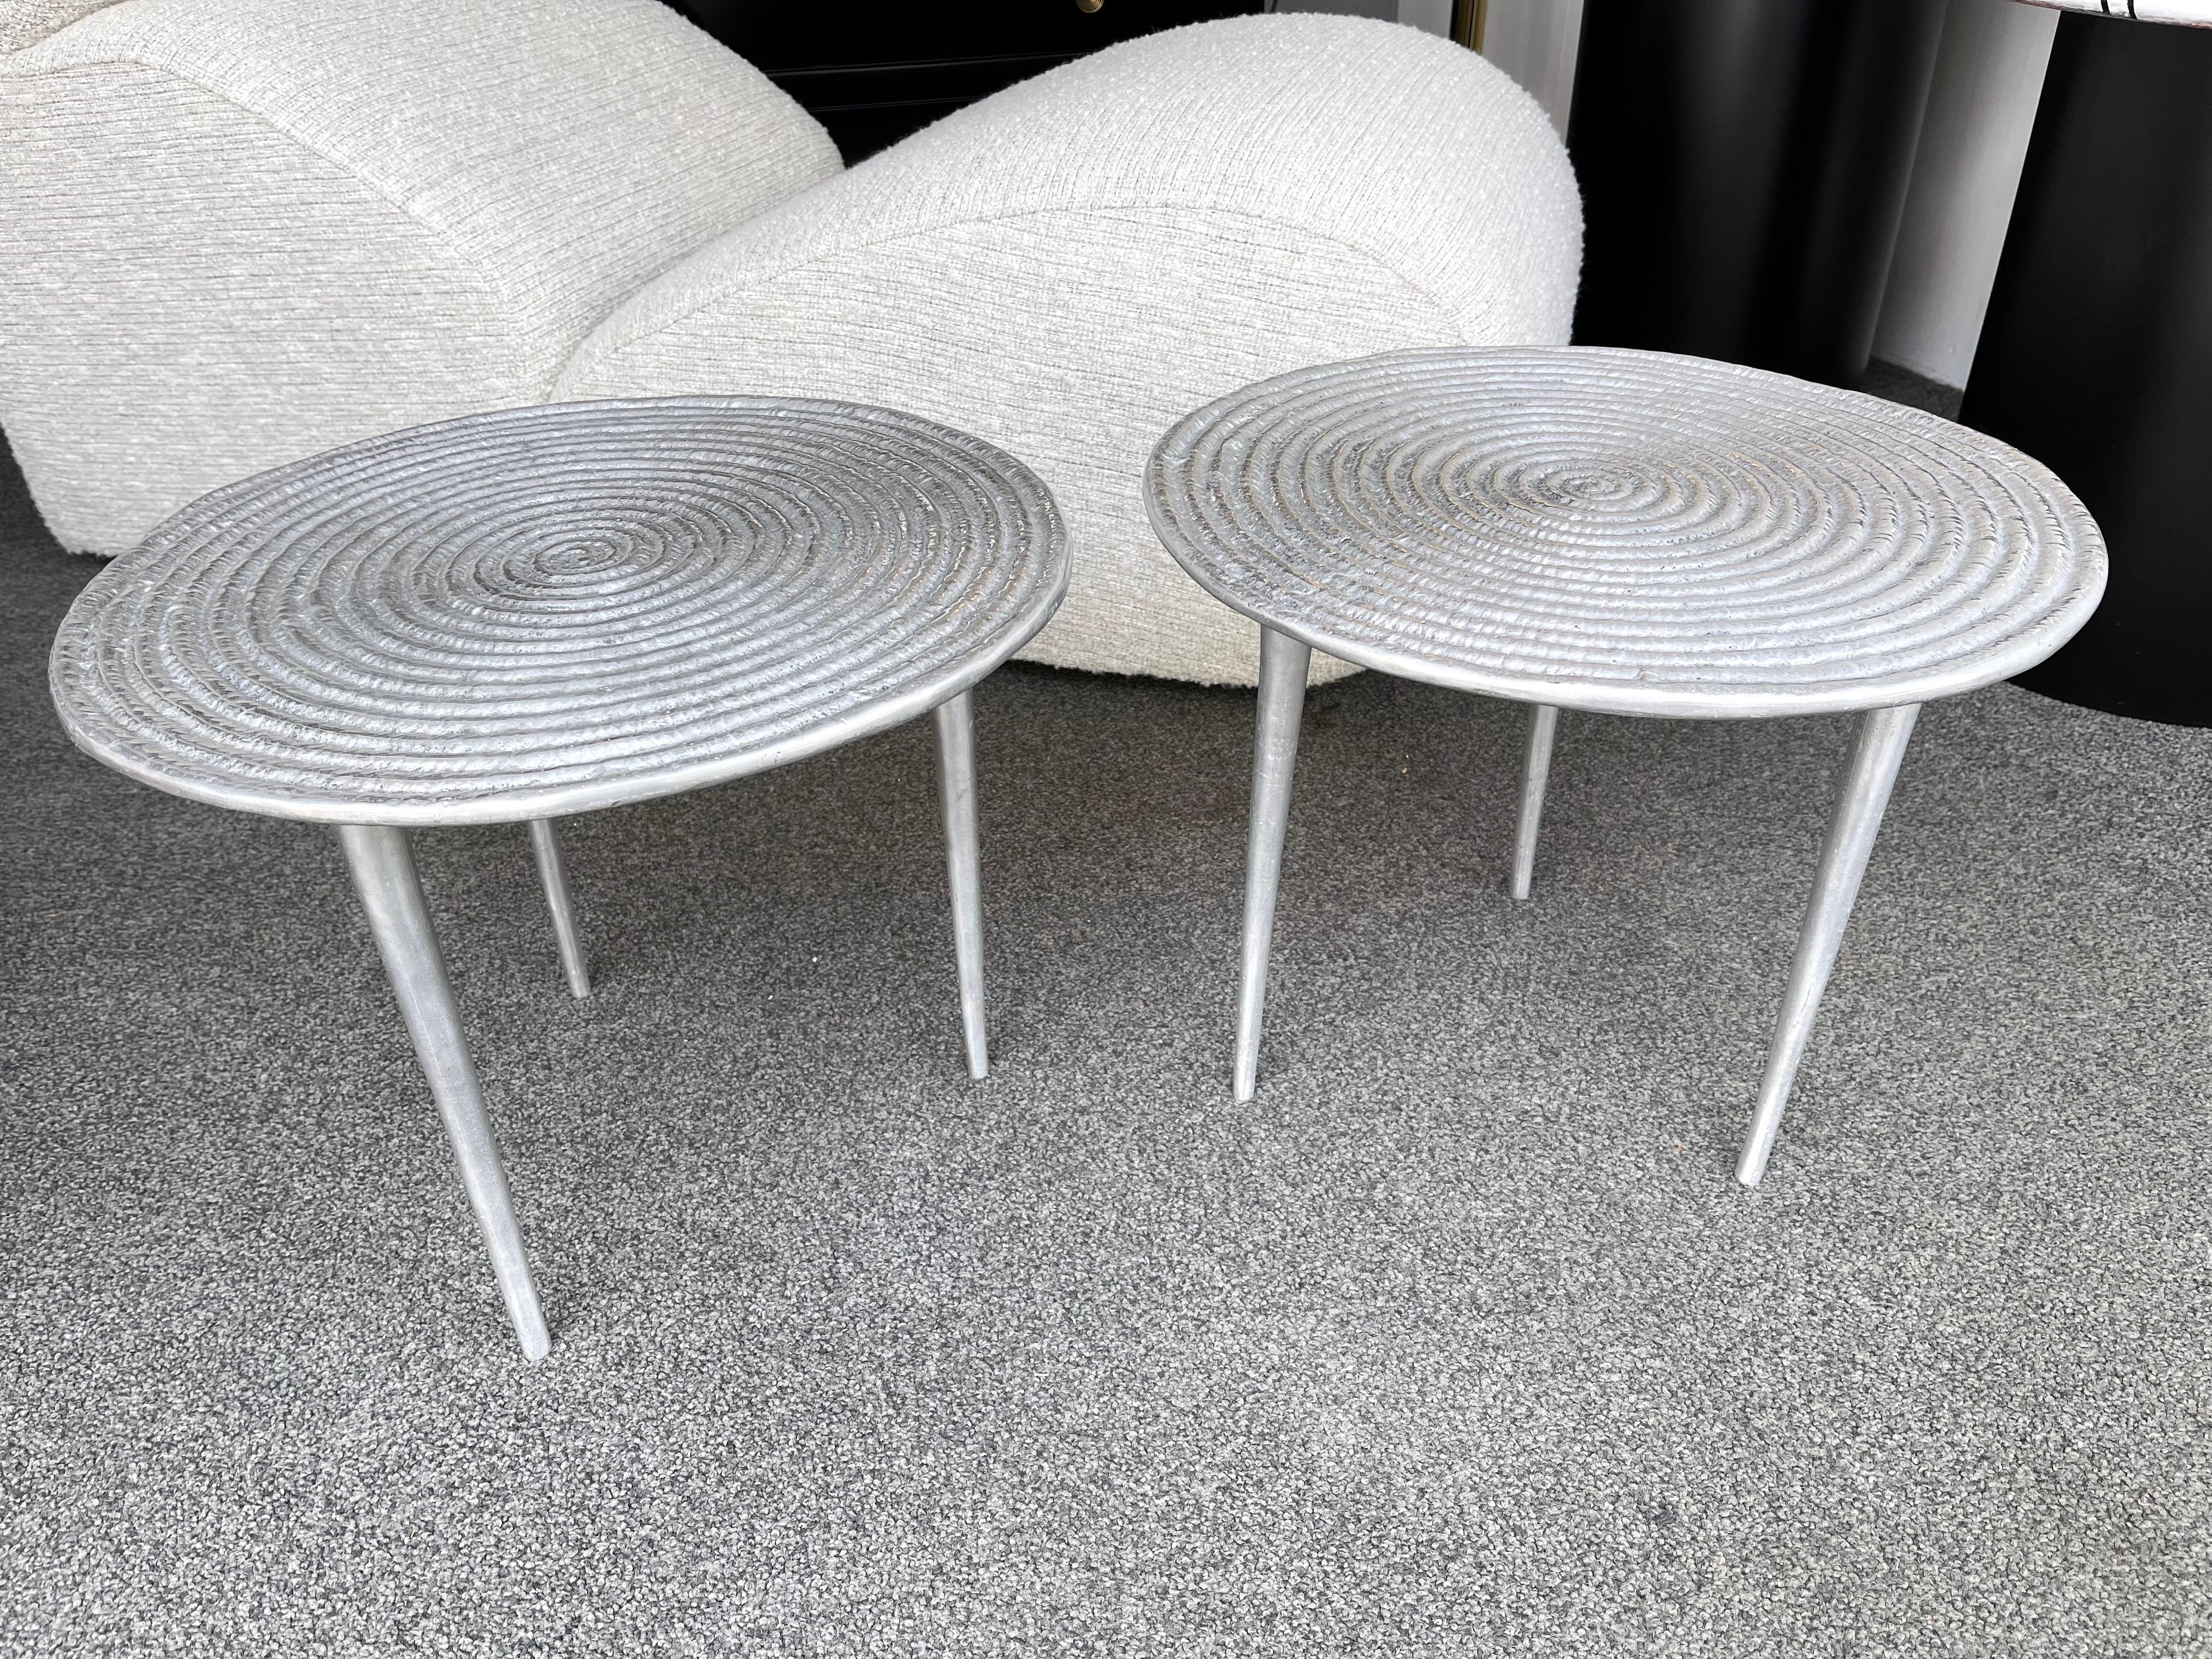 Pair of Cast Metal Side Tables, Italy, 1990s For Sale 3